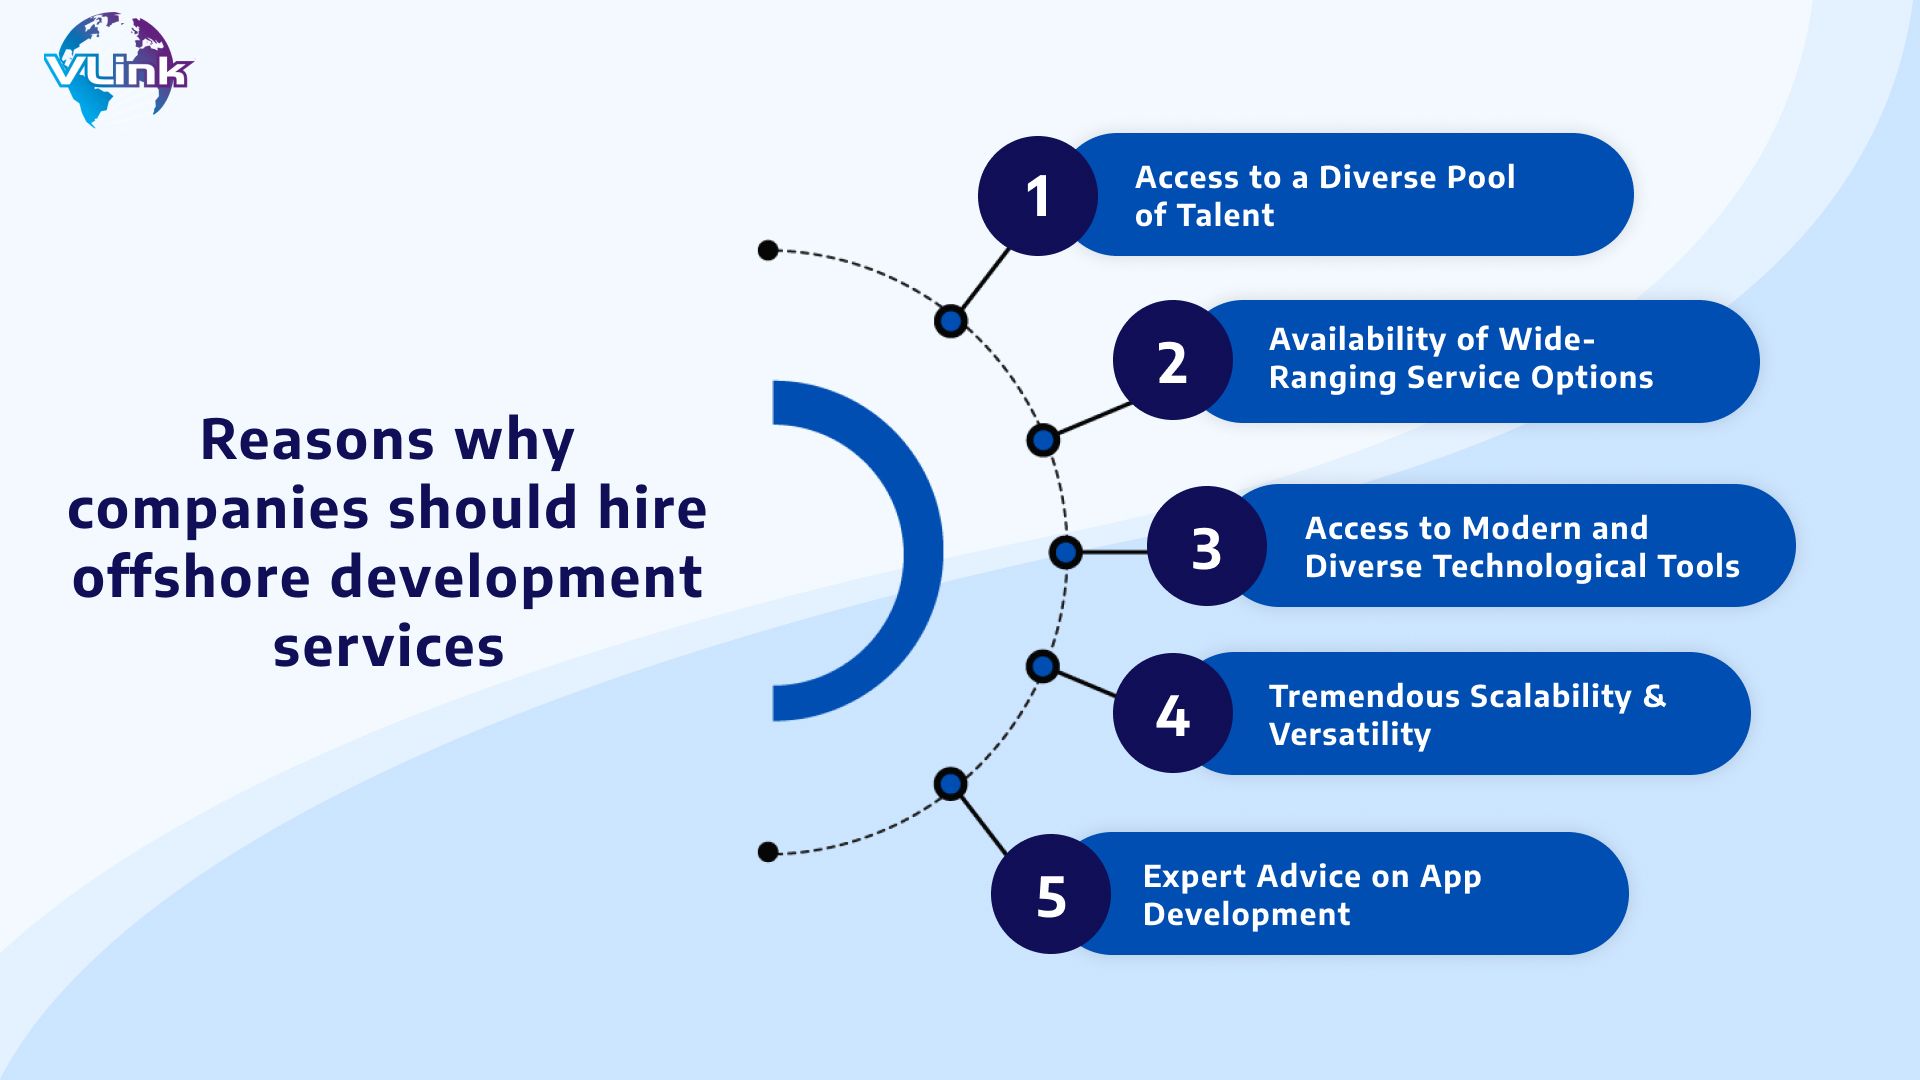 Reasons Why Companies Should Hire Offshore Development Services